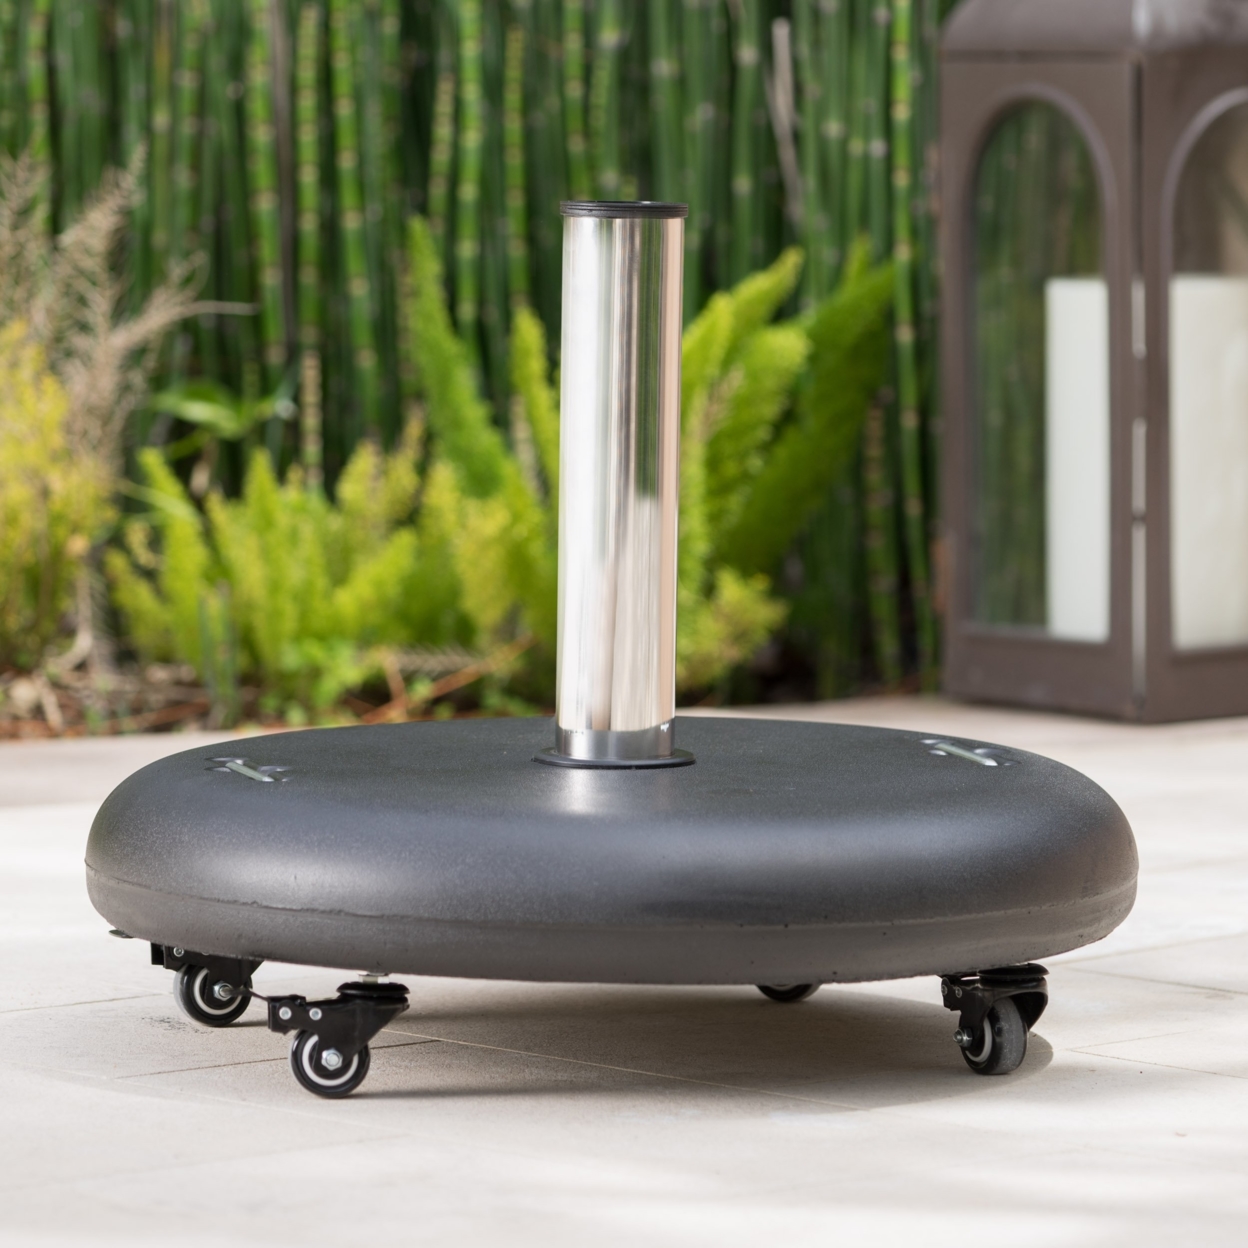 Hercules 88lbs Umbrella Base With Wheels & Stainless Steel Pole Handle